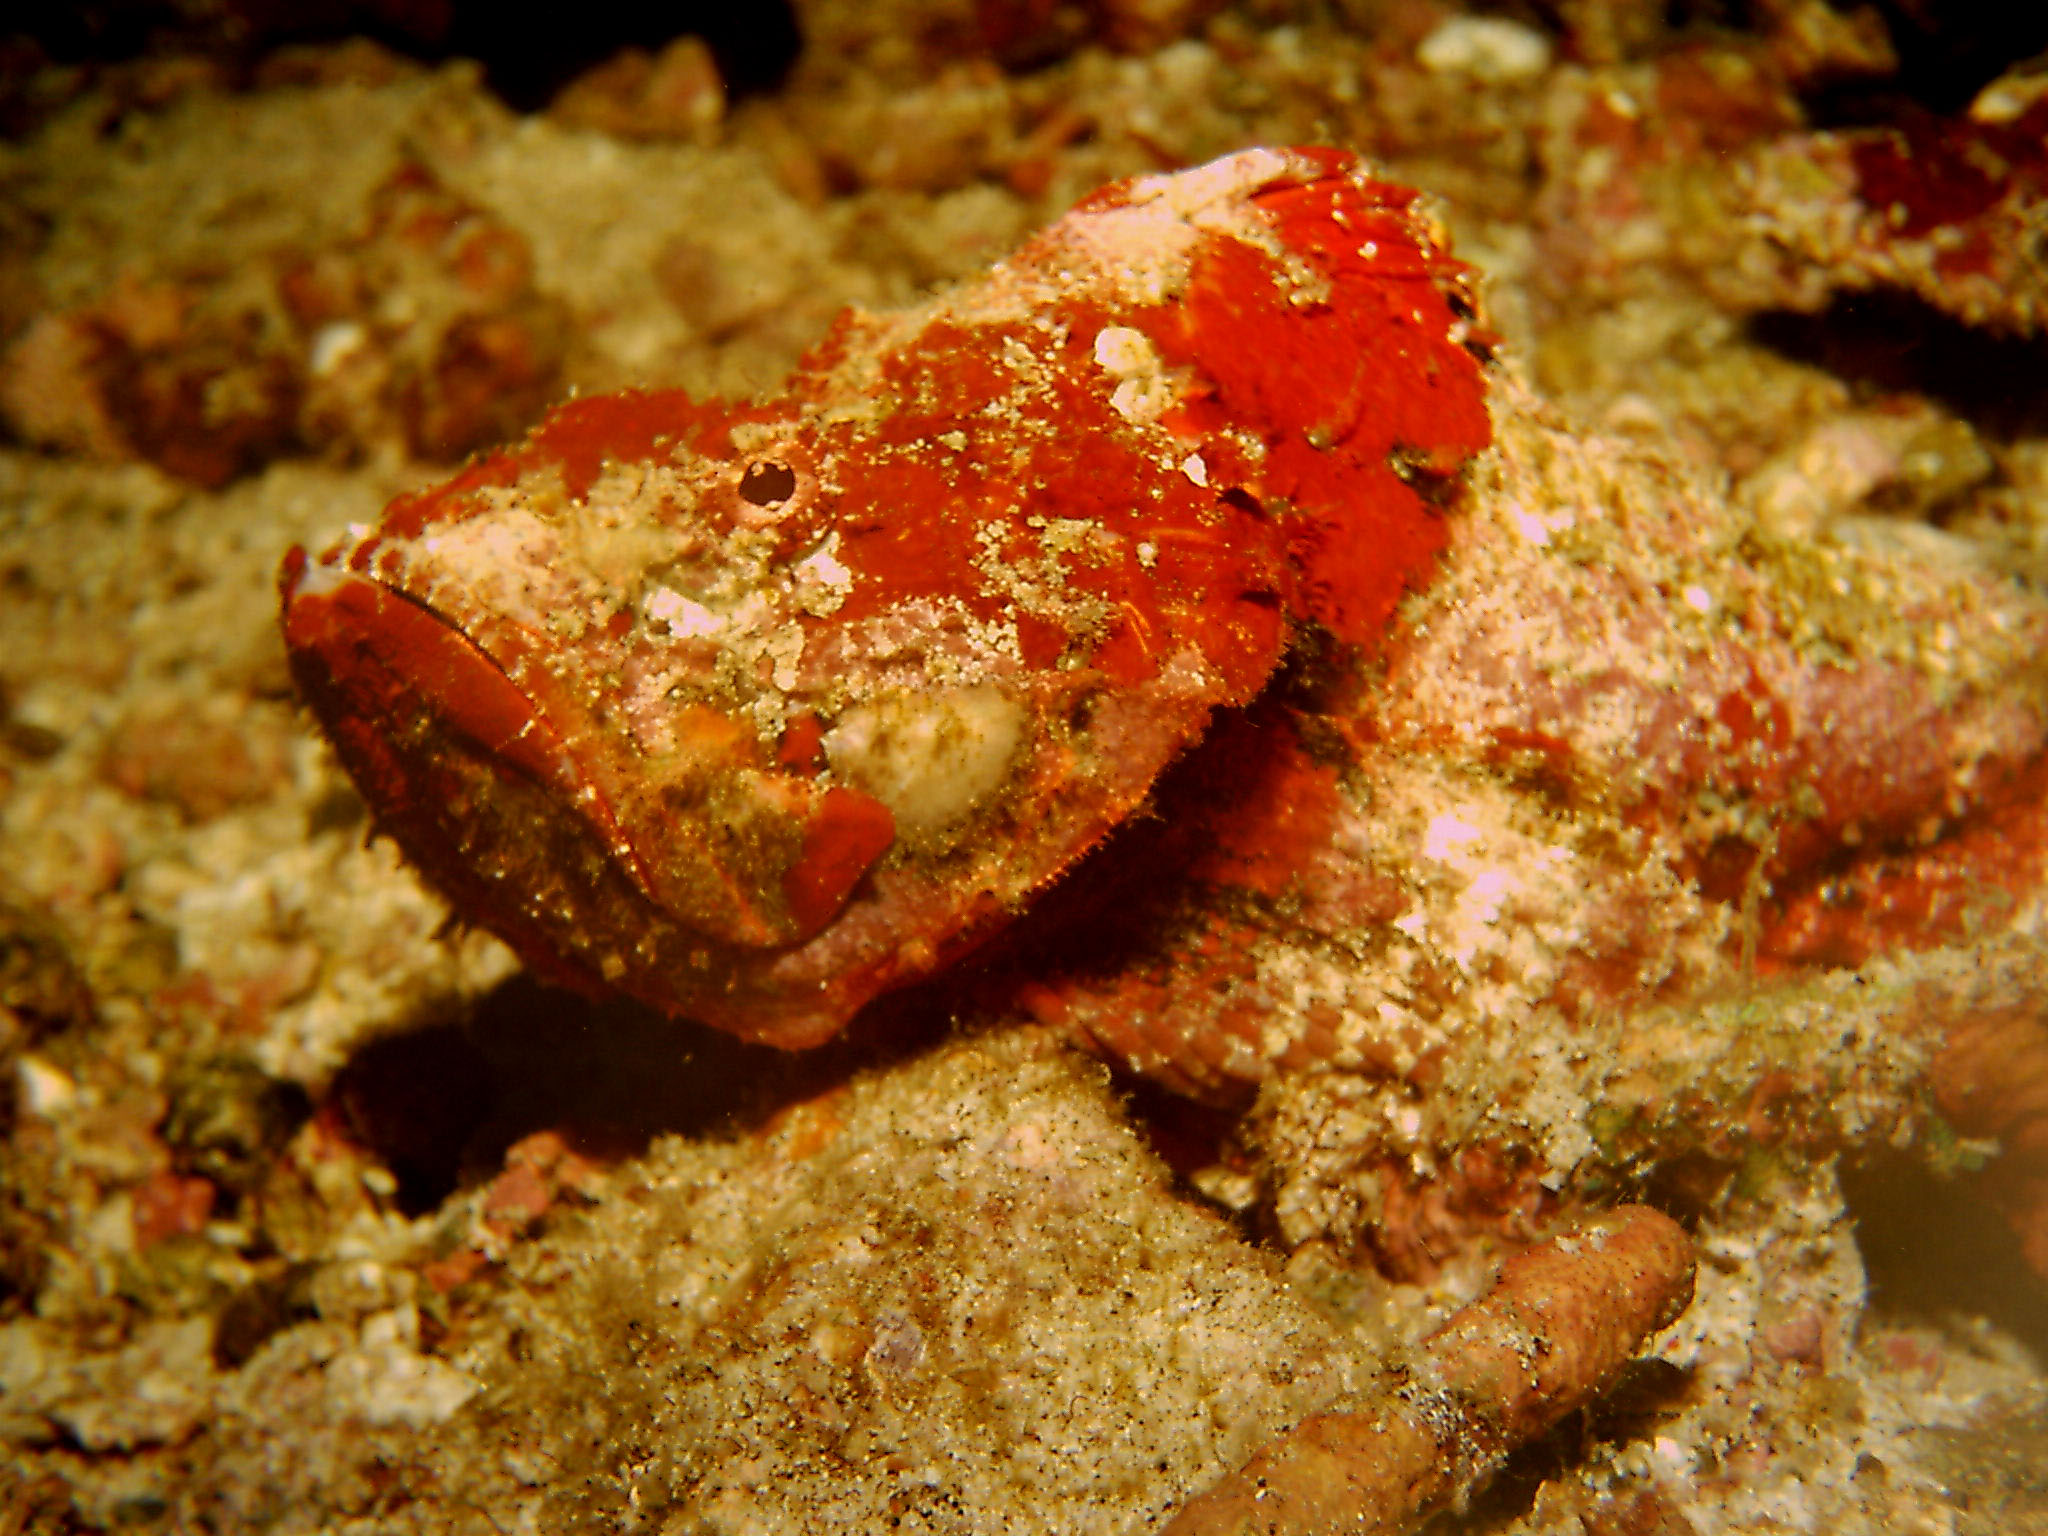 Red stone- or scorpionfish